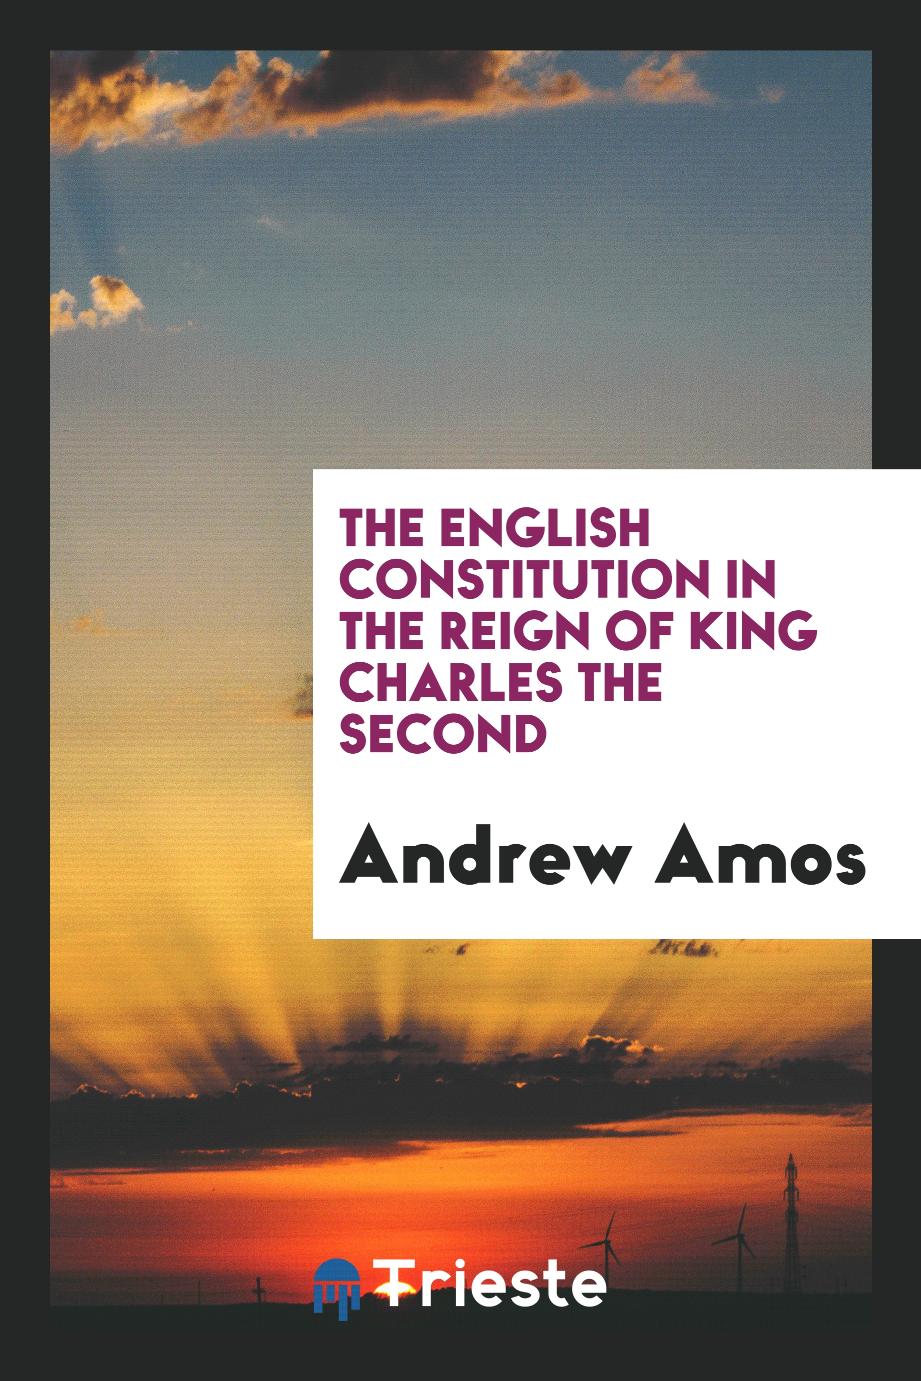 The English Constitution in the Reign of King Charles the Second